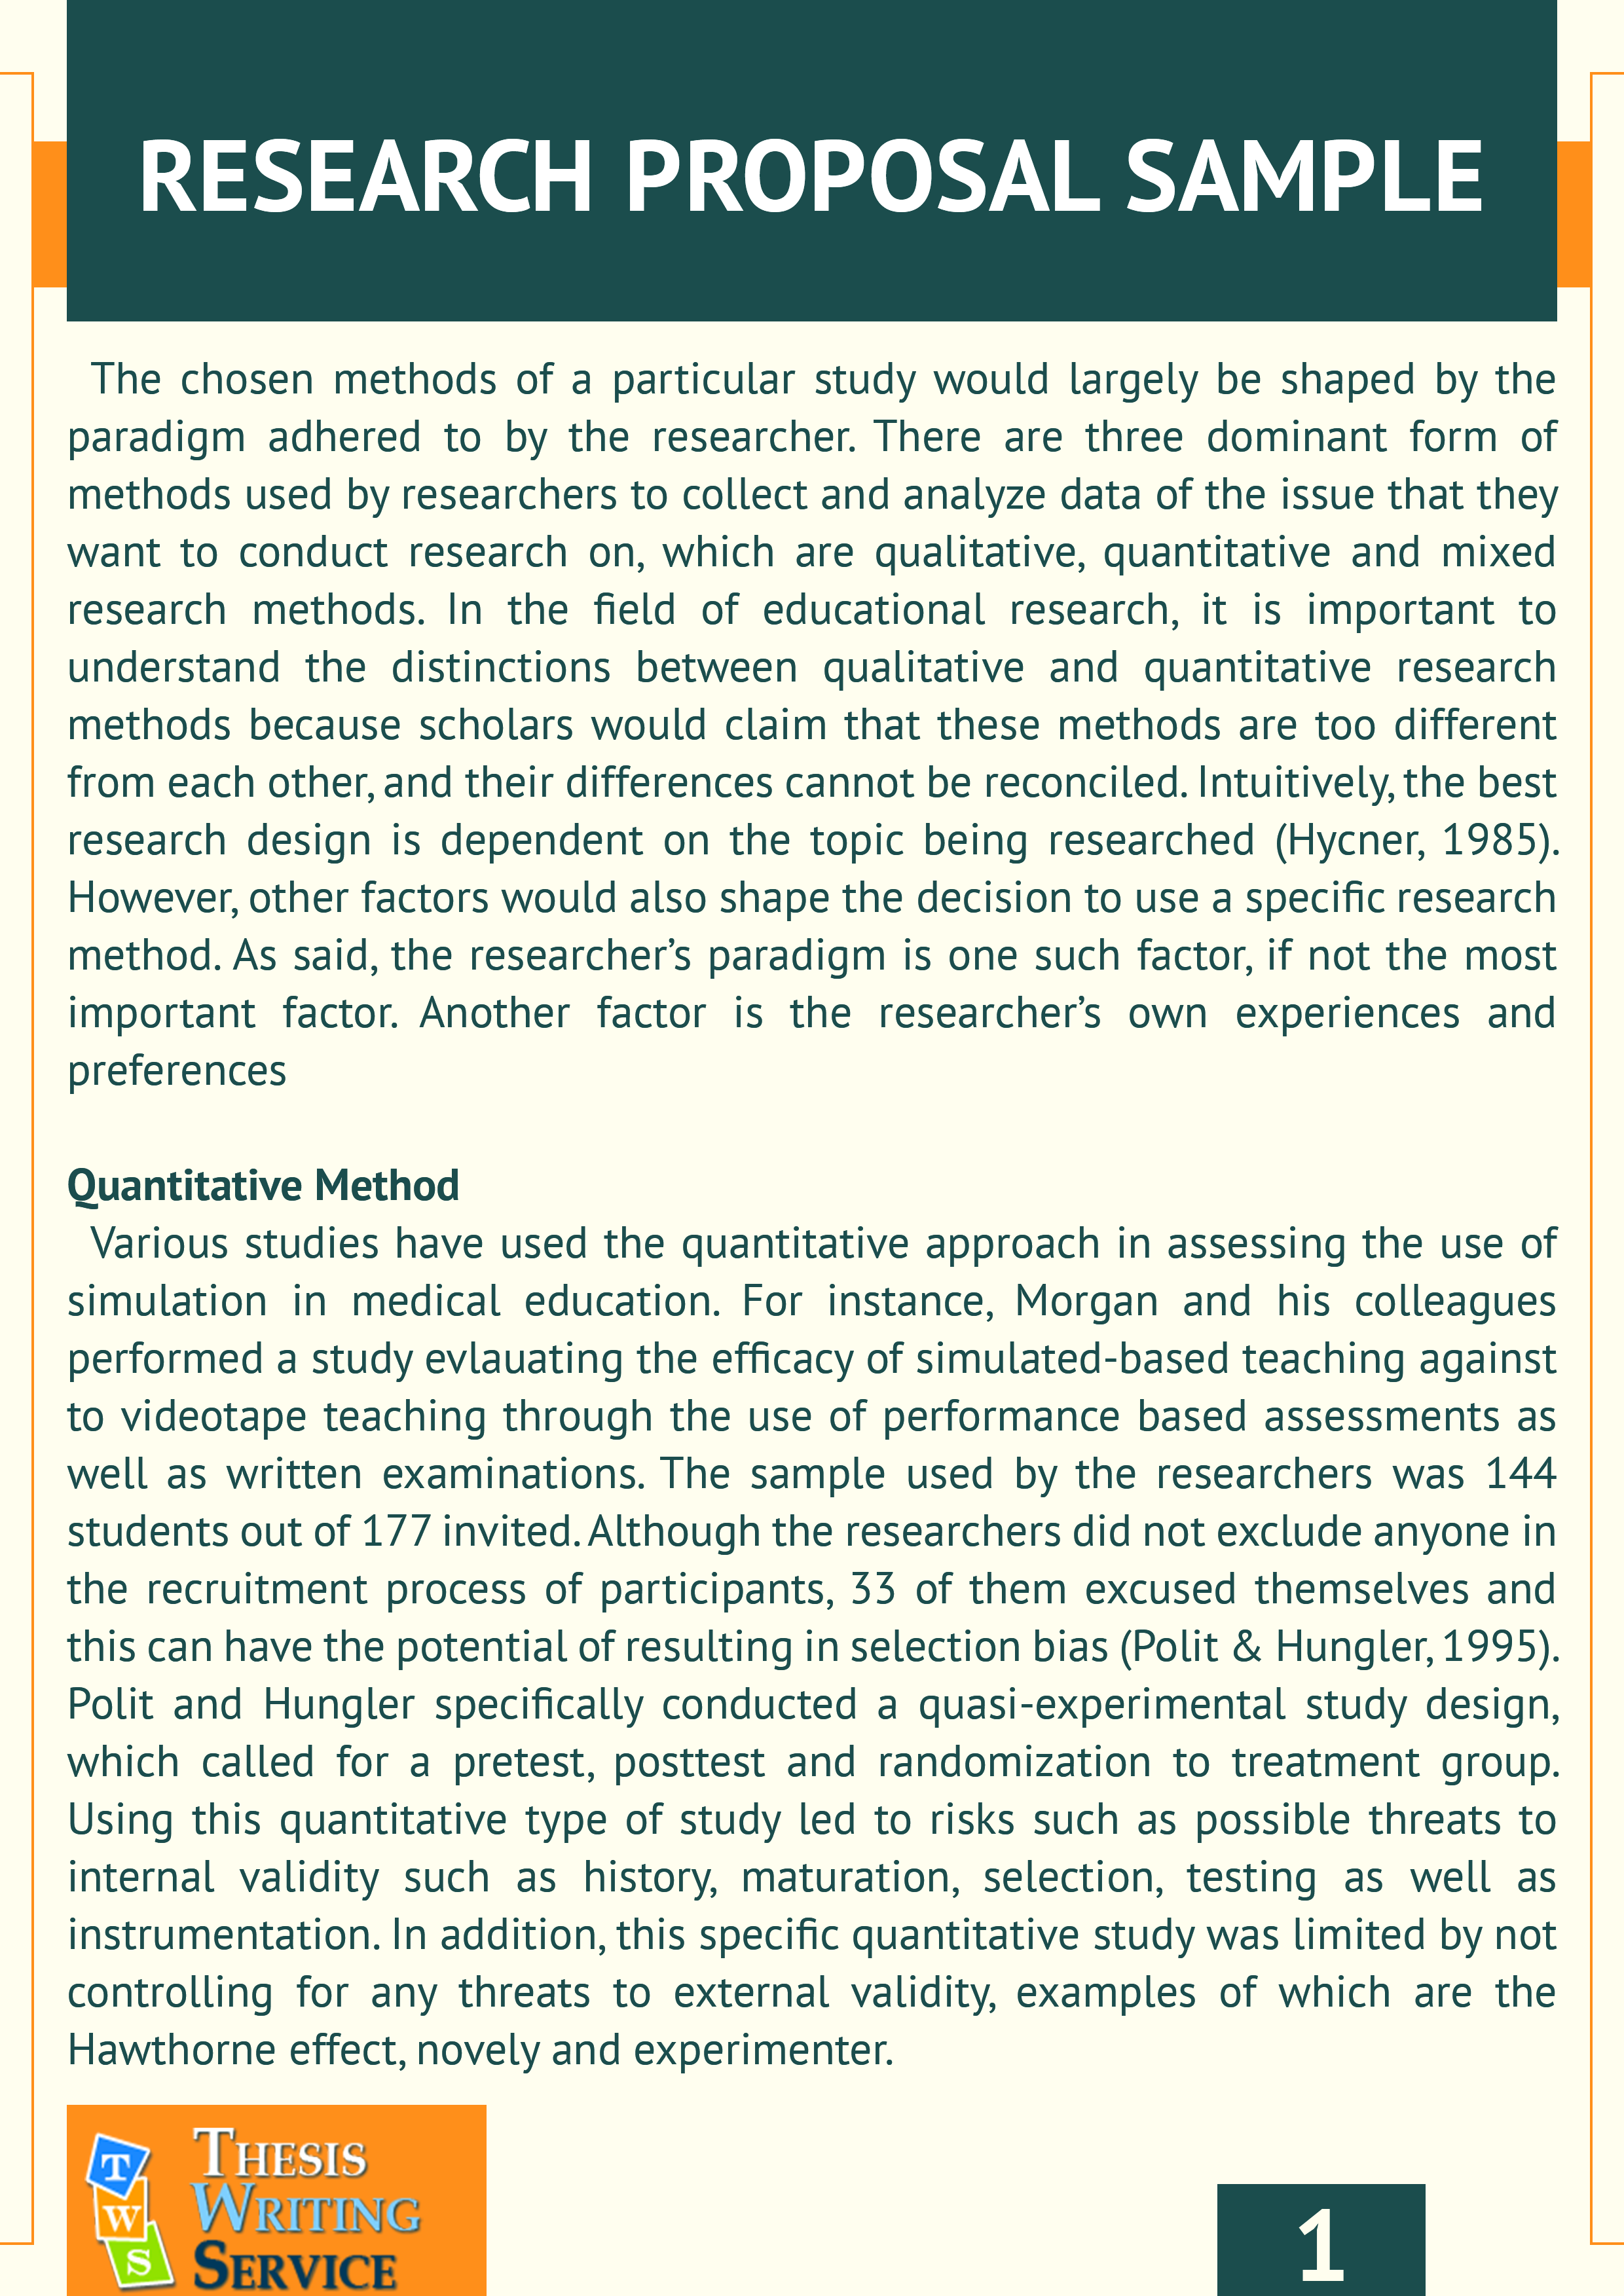 what is sample size in research proposal